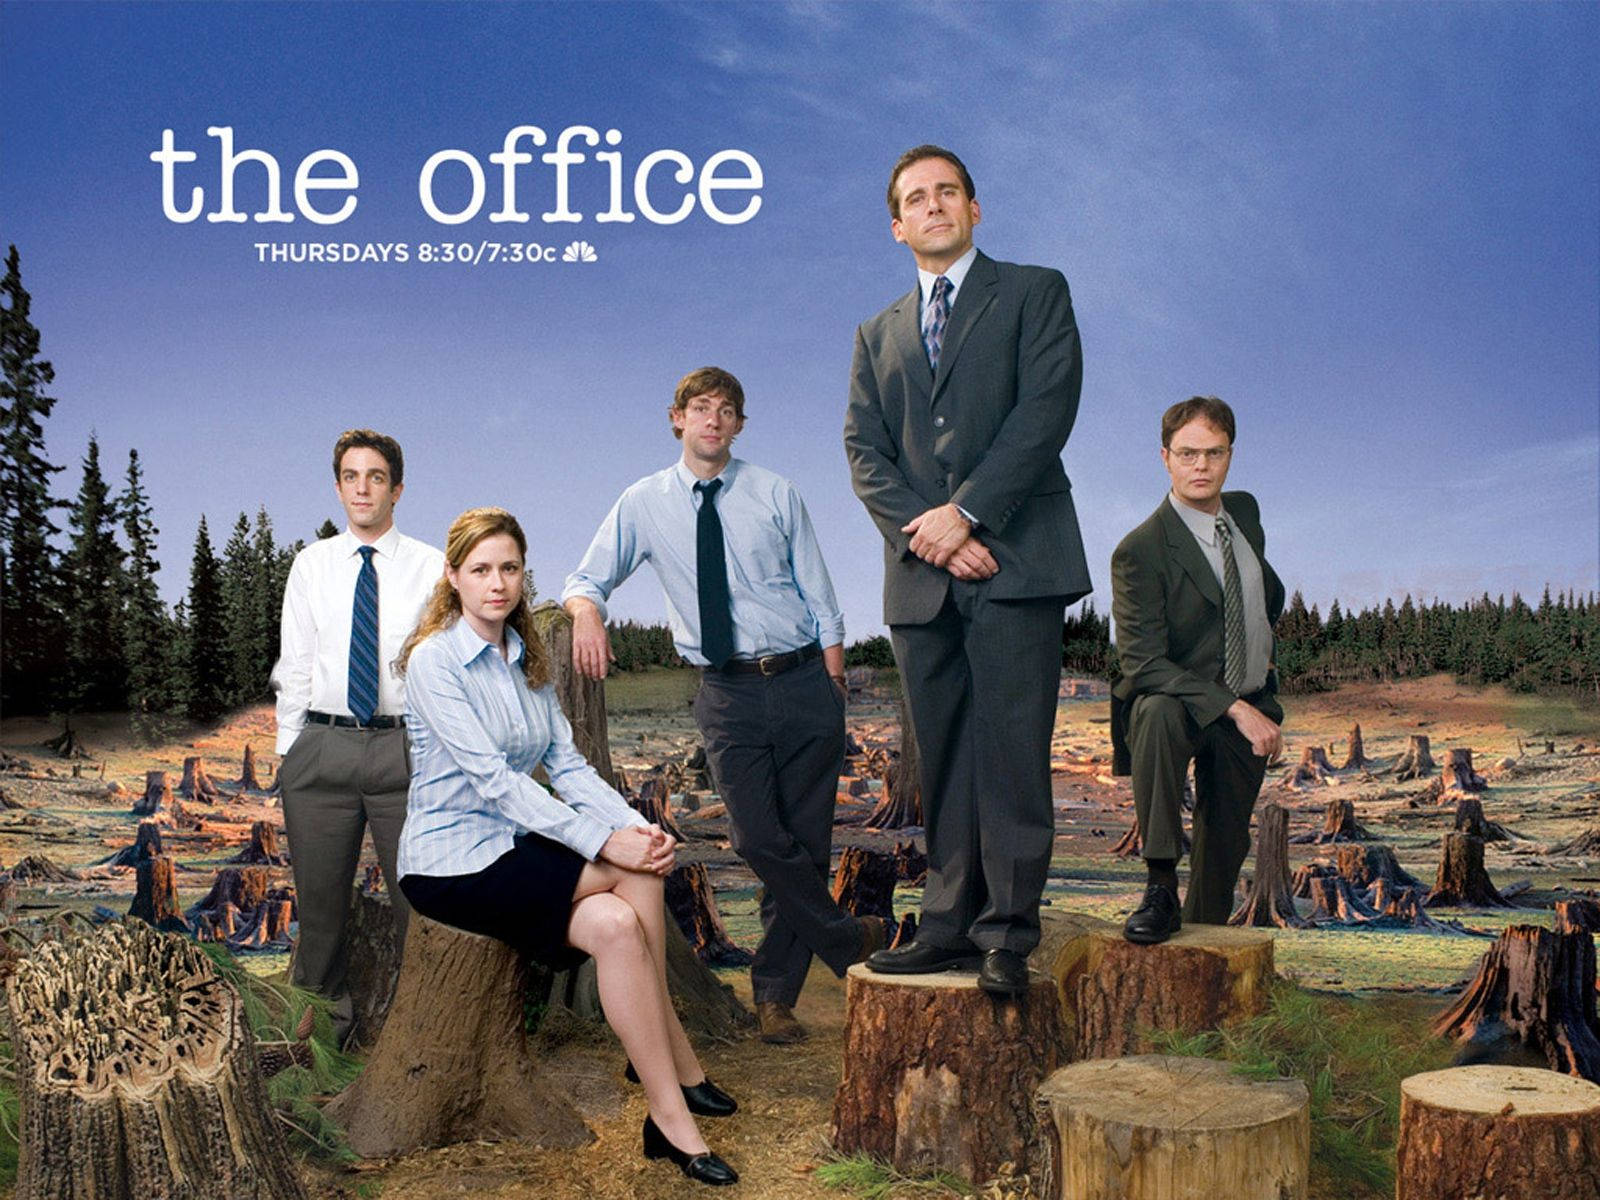 The Office Season 4 Poster - Cheers!